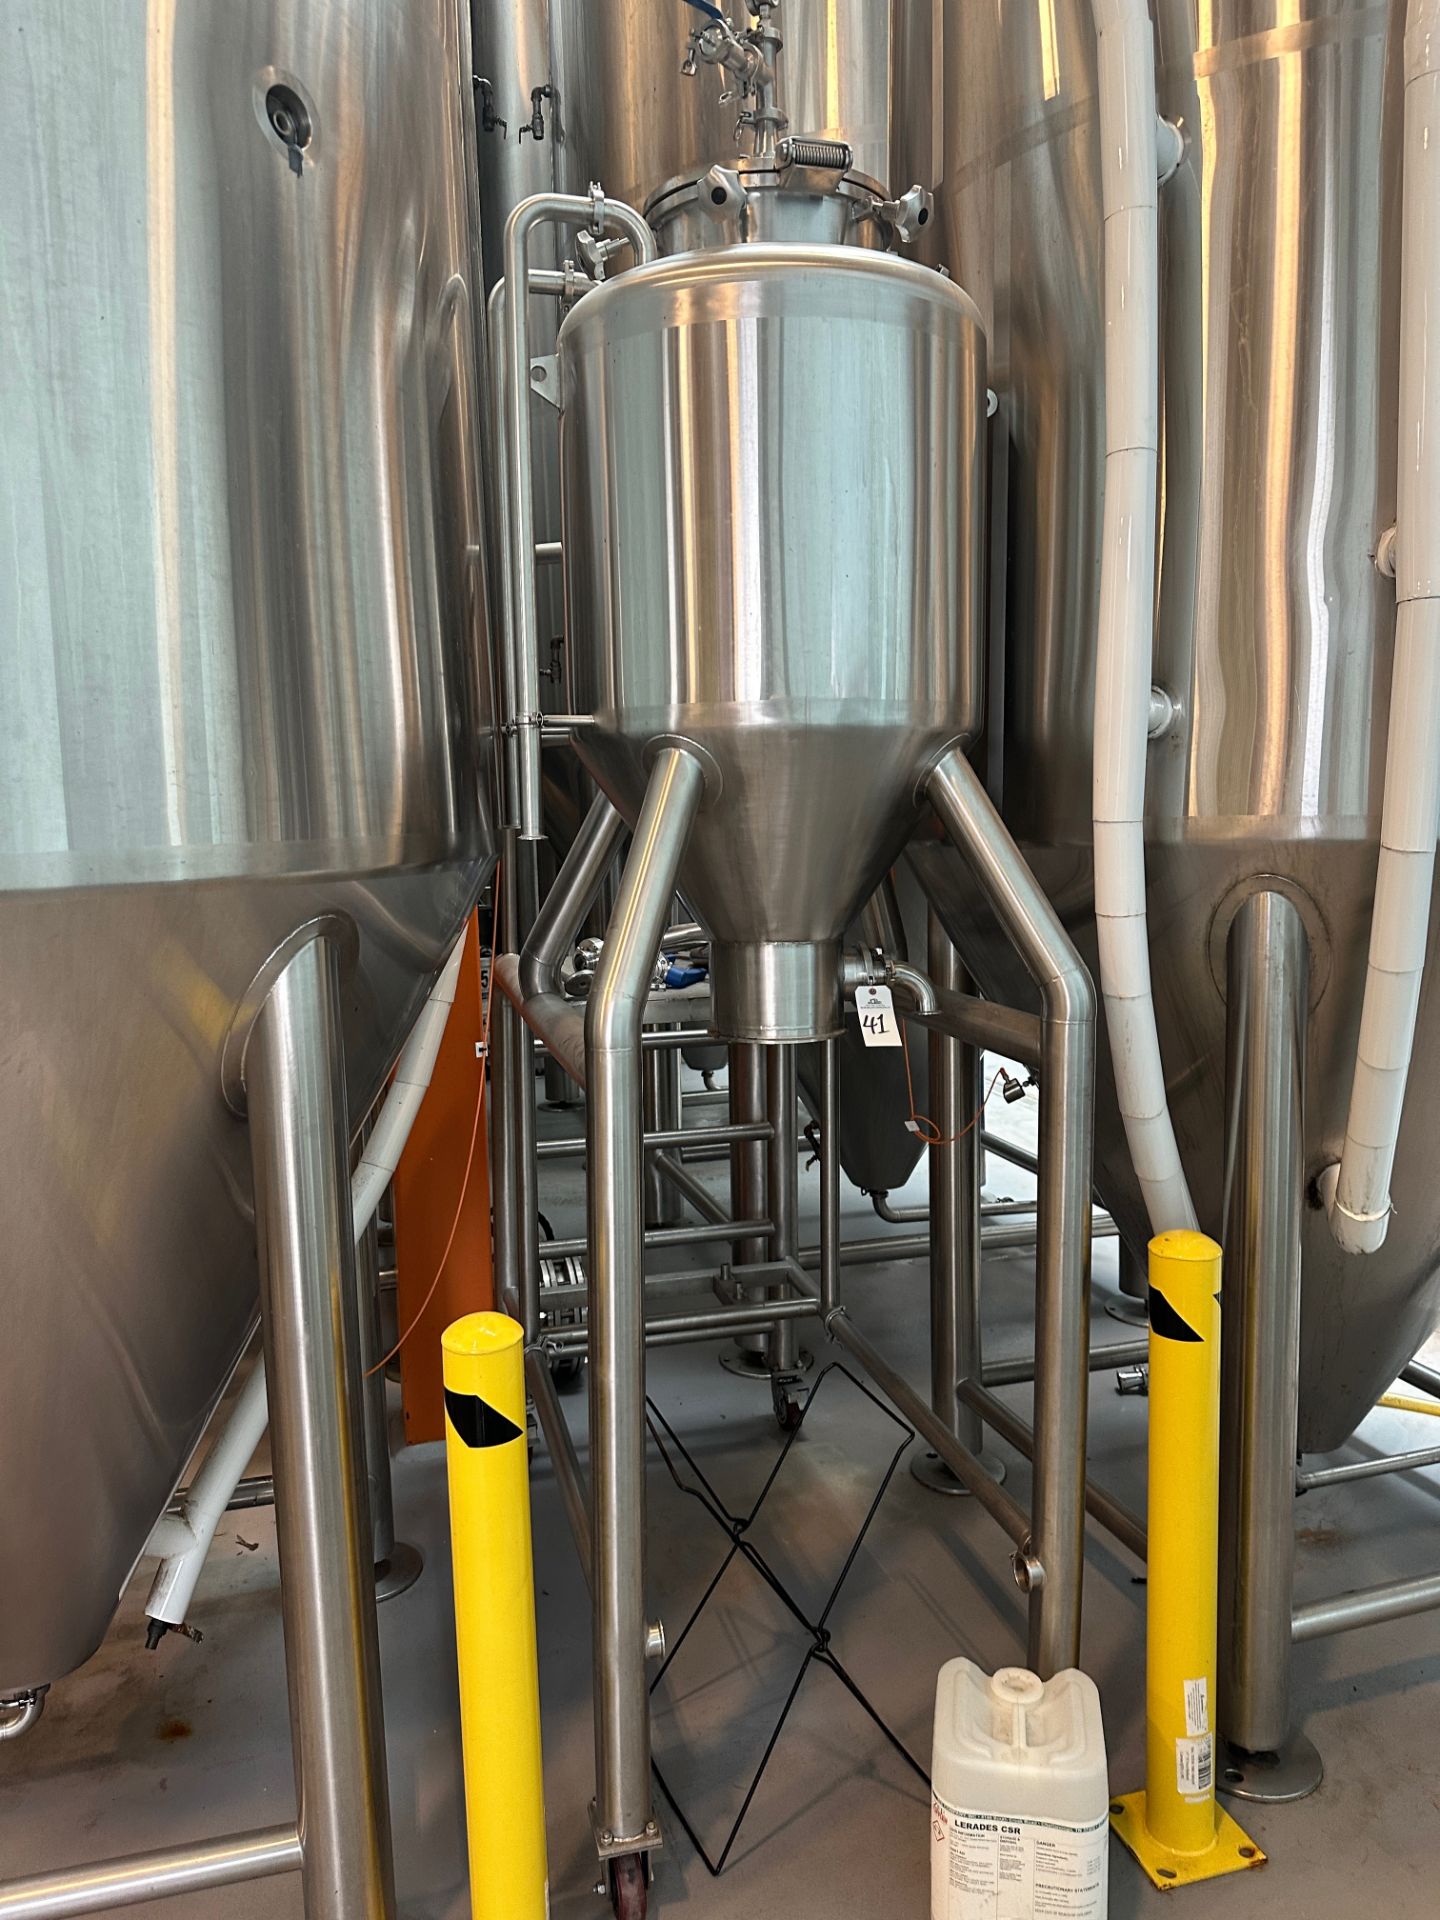 Complete 40 BBL Microbrewery - 40 BBL Deutsche 4-Vessel Brewhouse, Tanks, Can Line - See Description - Image 92 of 335